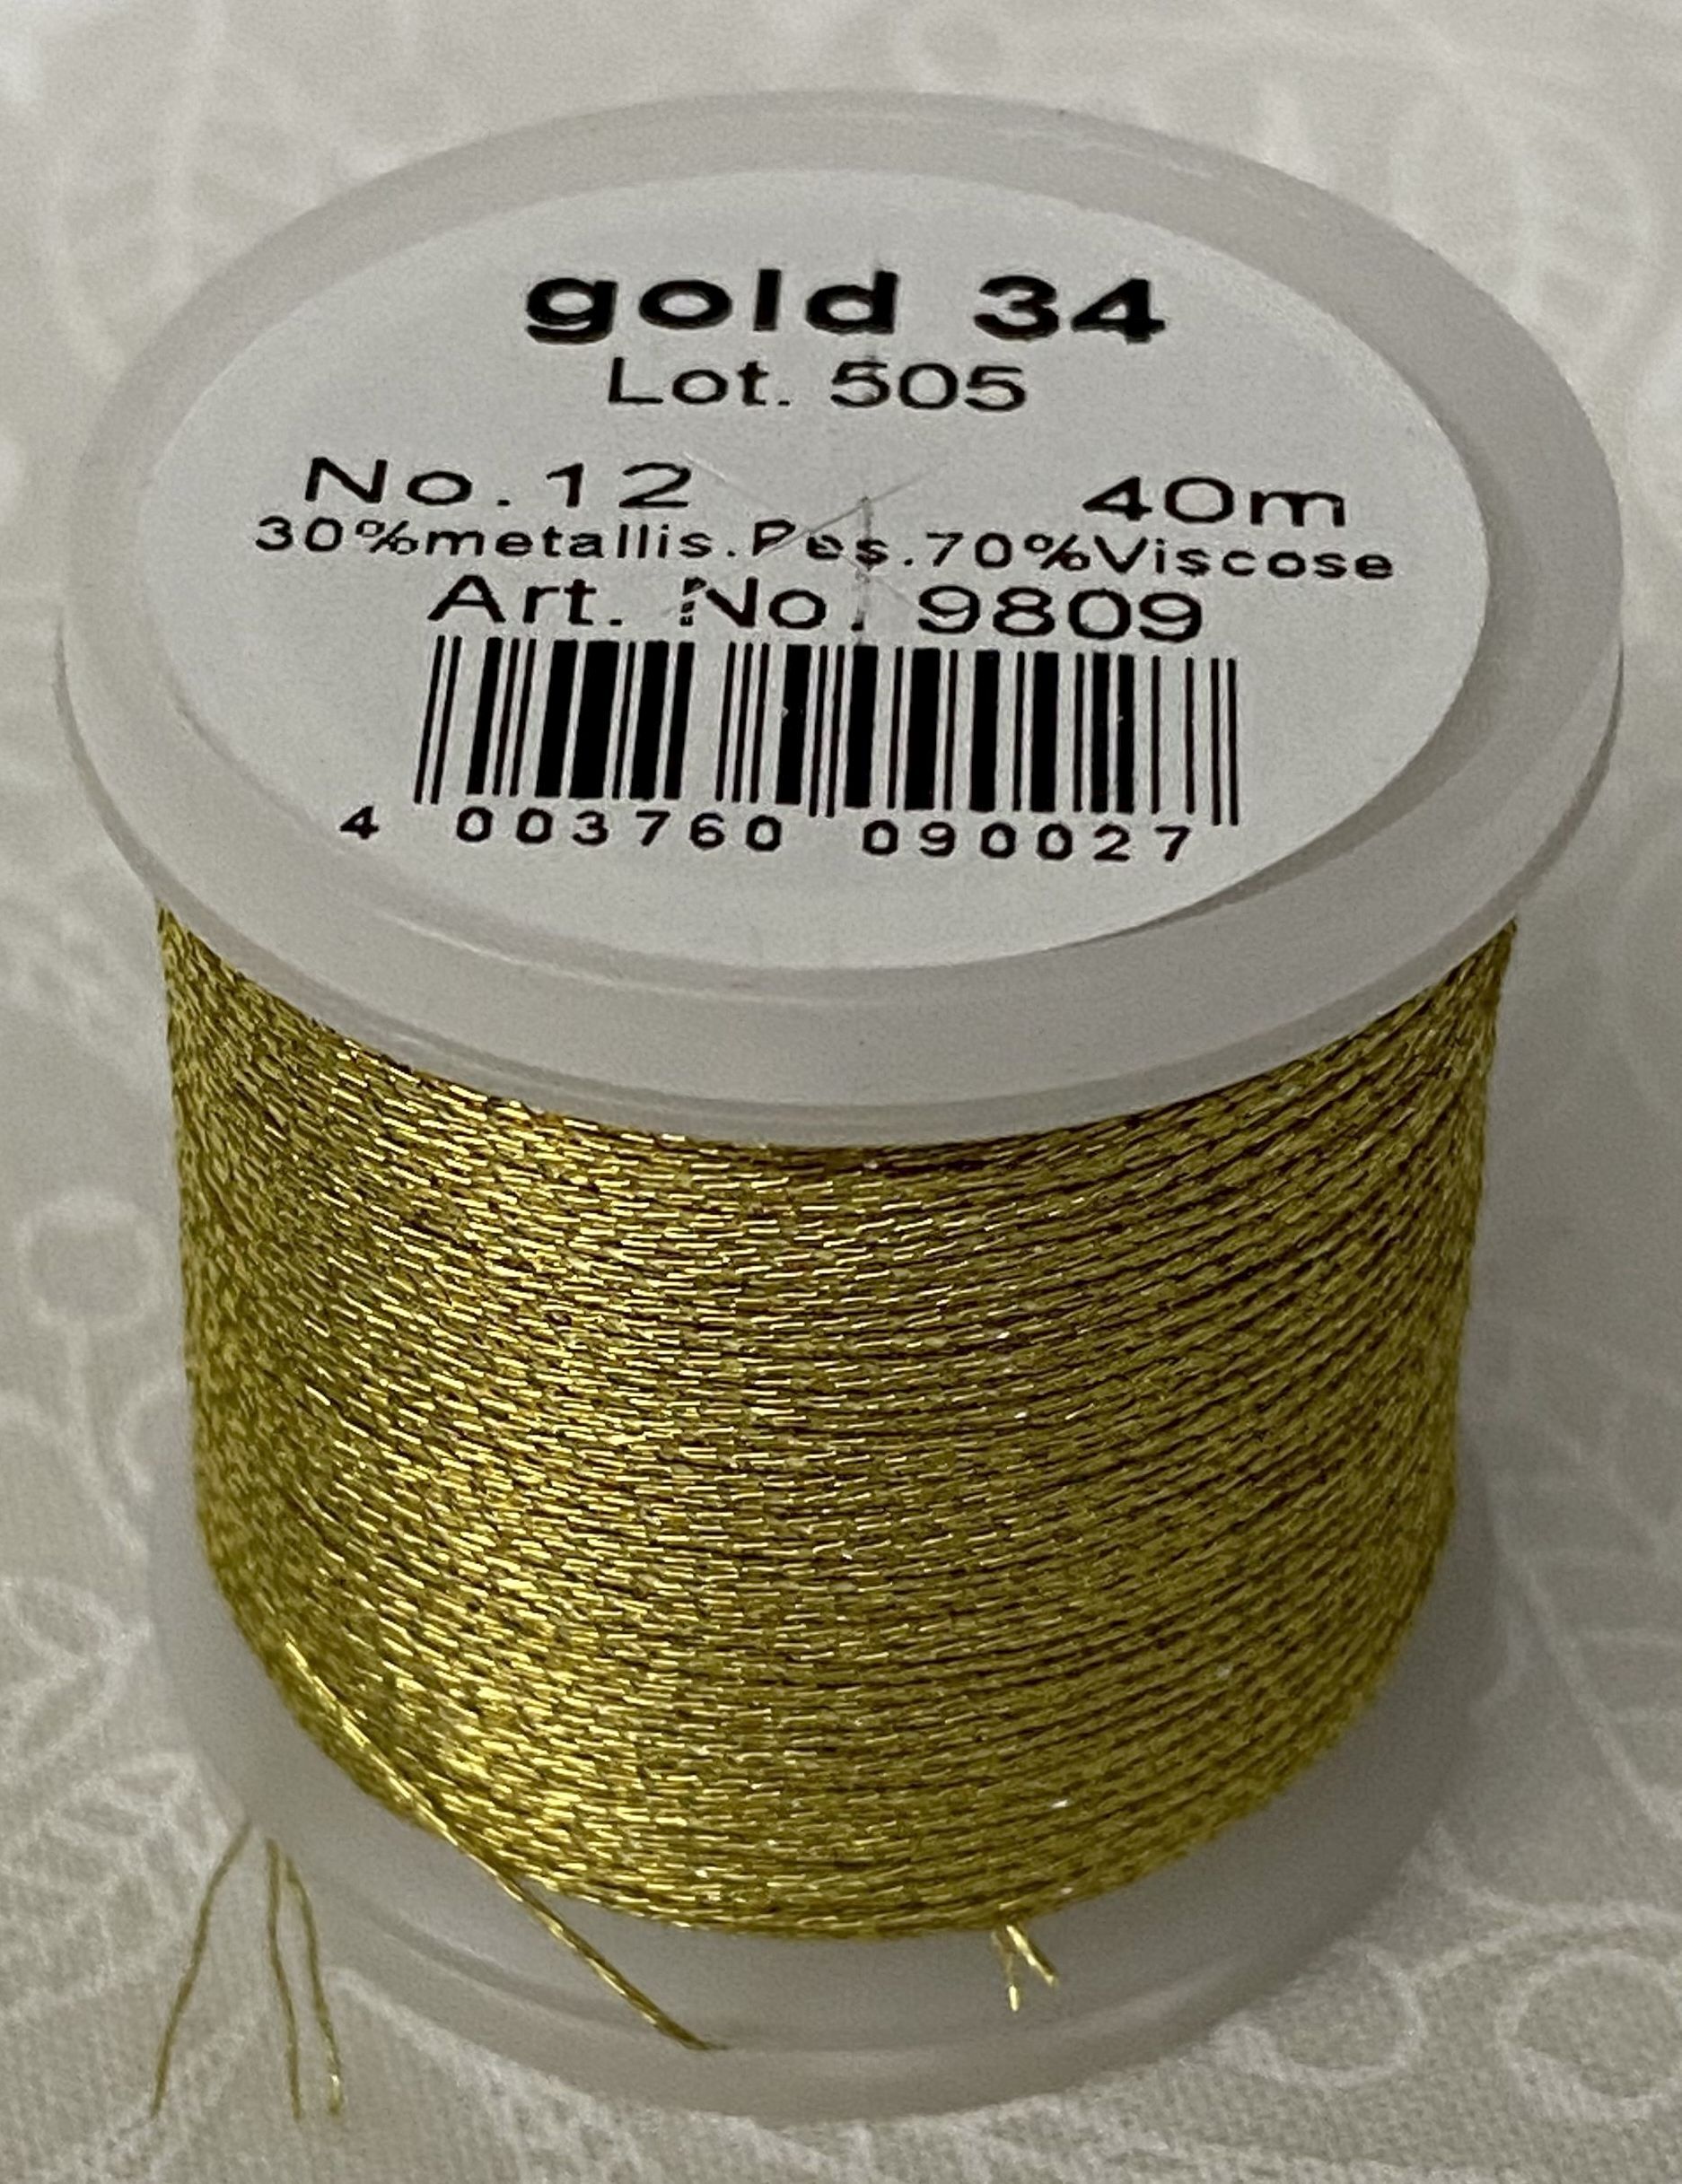 madeira-metallic-12-hand-embroidery-thread-40m-3ply-divisible-colour-gold-34